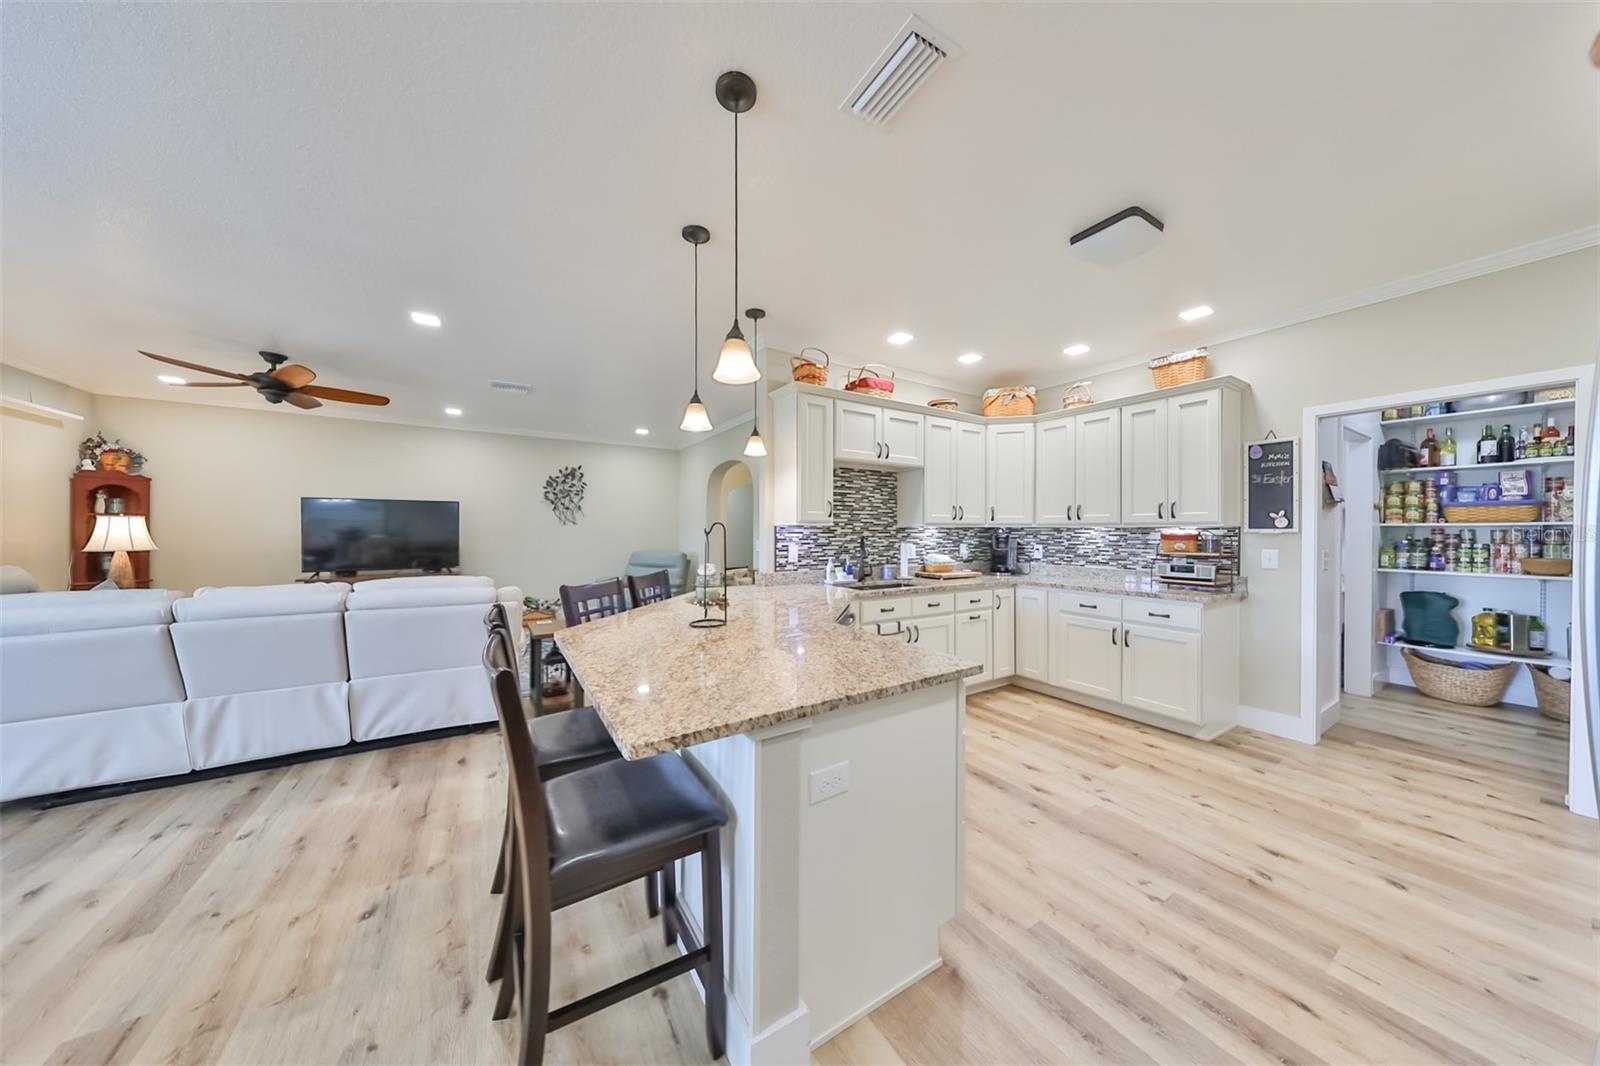 The kitchen has light colored floors to match the ivory colored cabinetry and neutral wall colors, and opens up into the oversized walk-in pantry room.